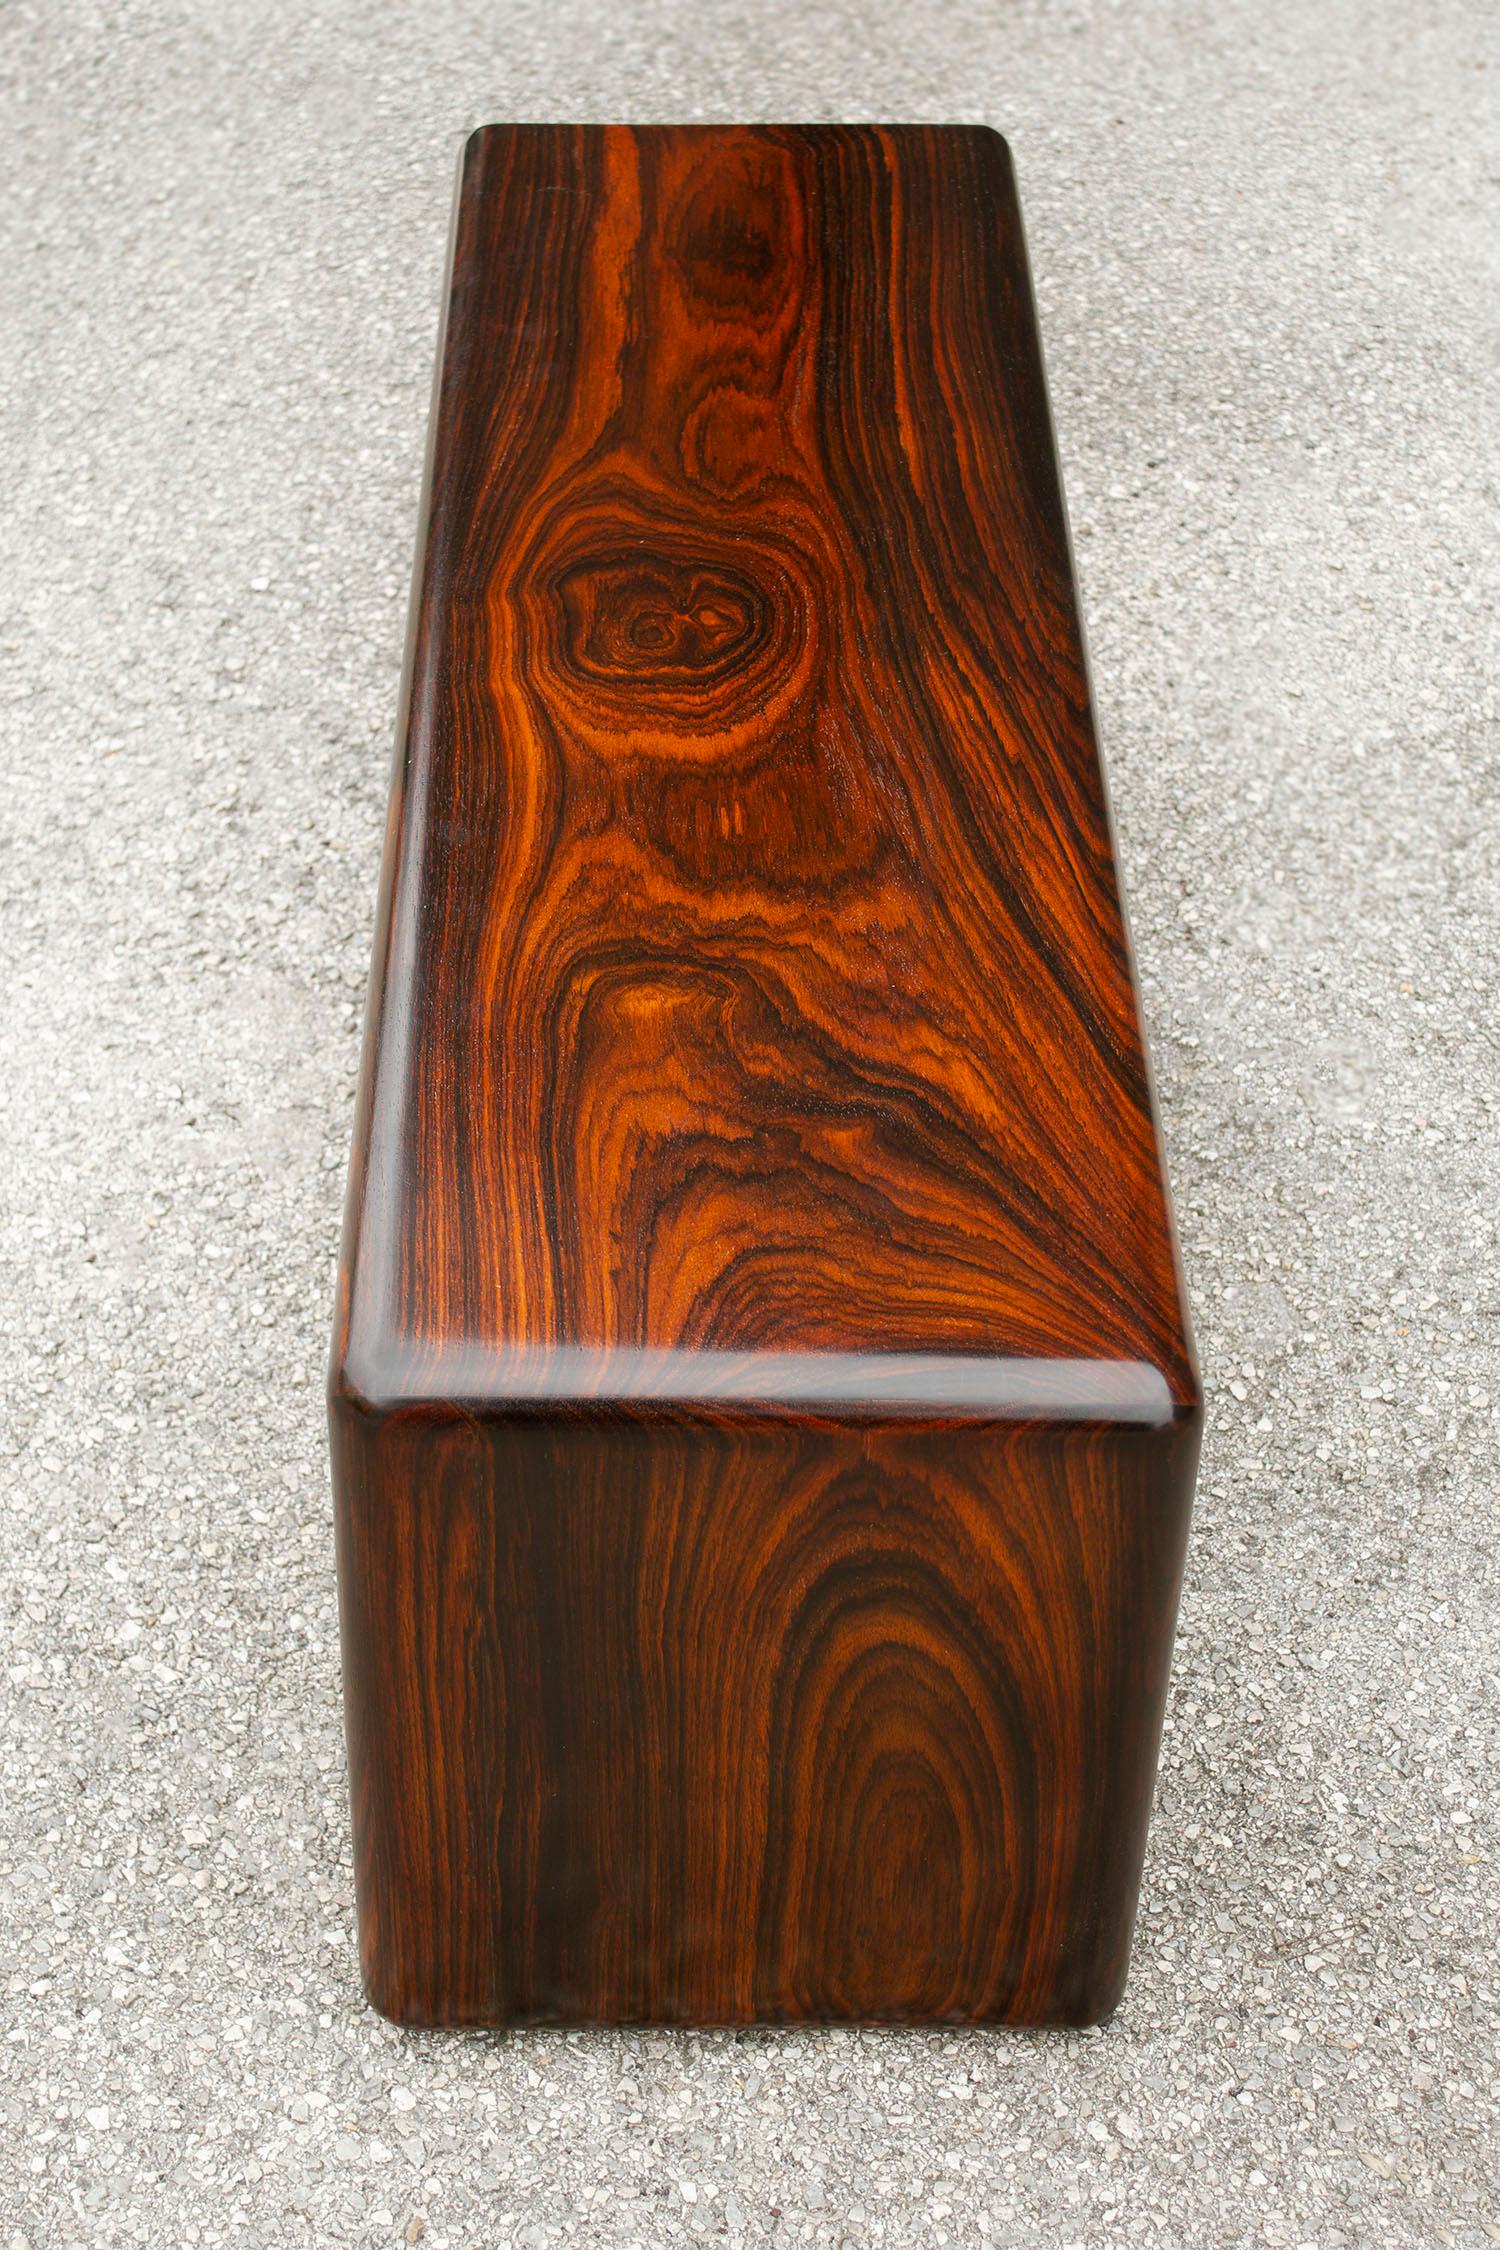 Mexican Don Shoemaker Solid Brazilian Rosewood Table / Bench 1970s Studio Craft Mexico